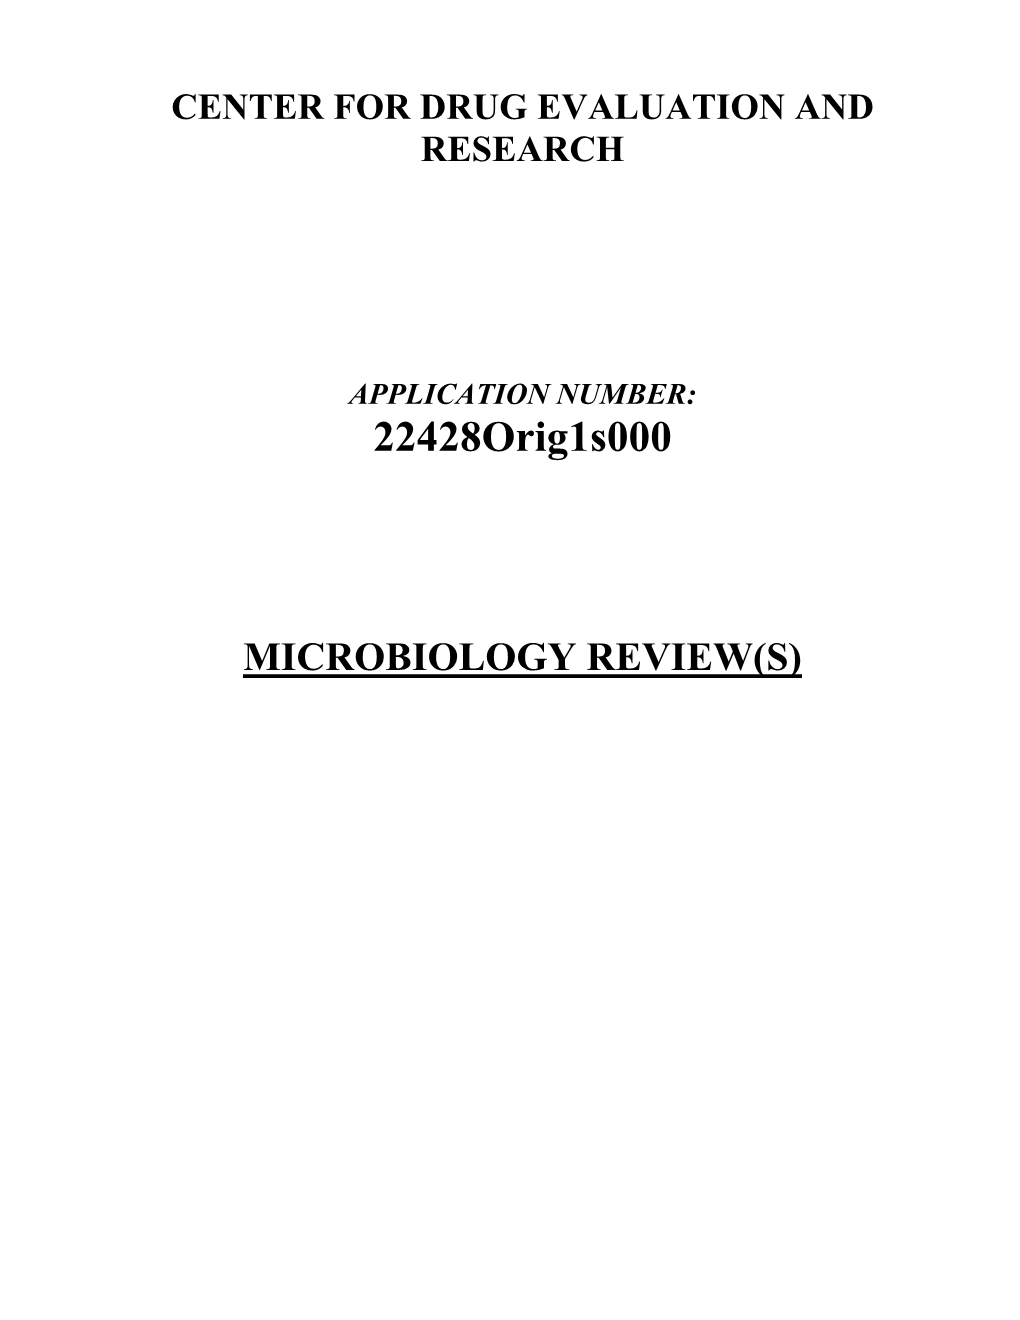 Microbiology Review(S) (PDF)